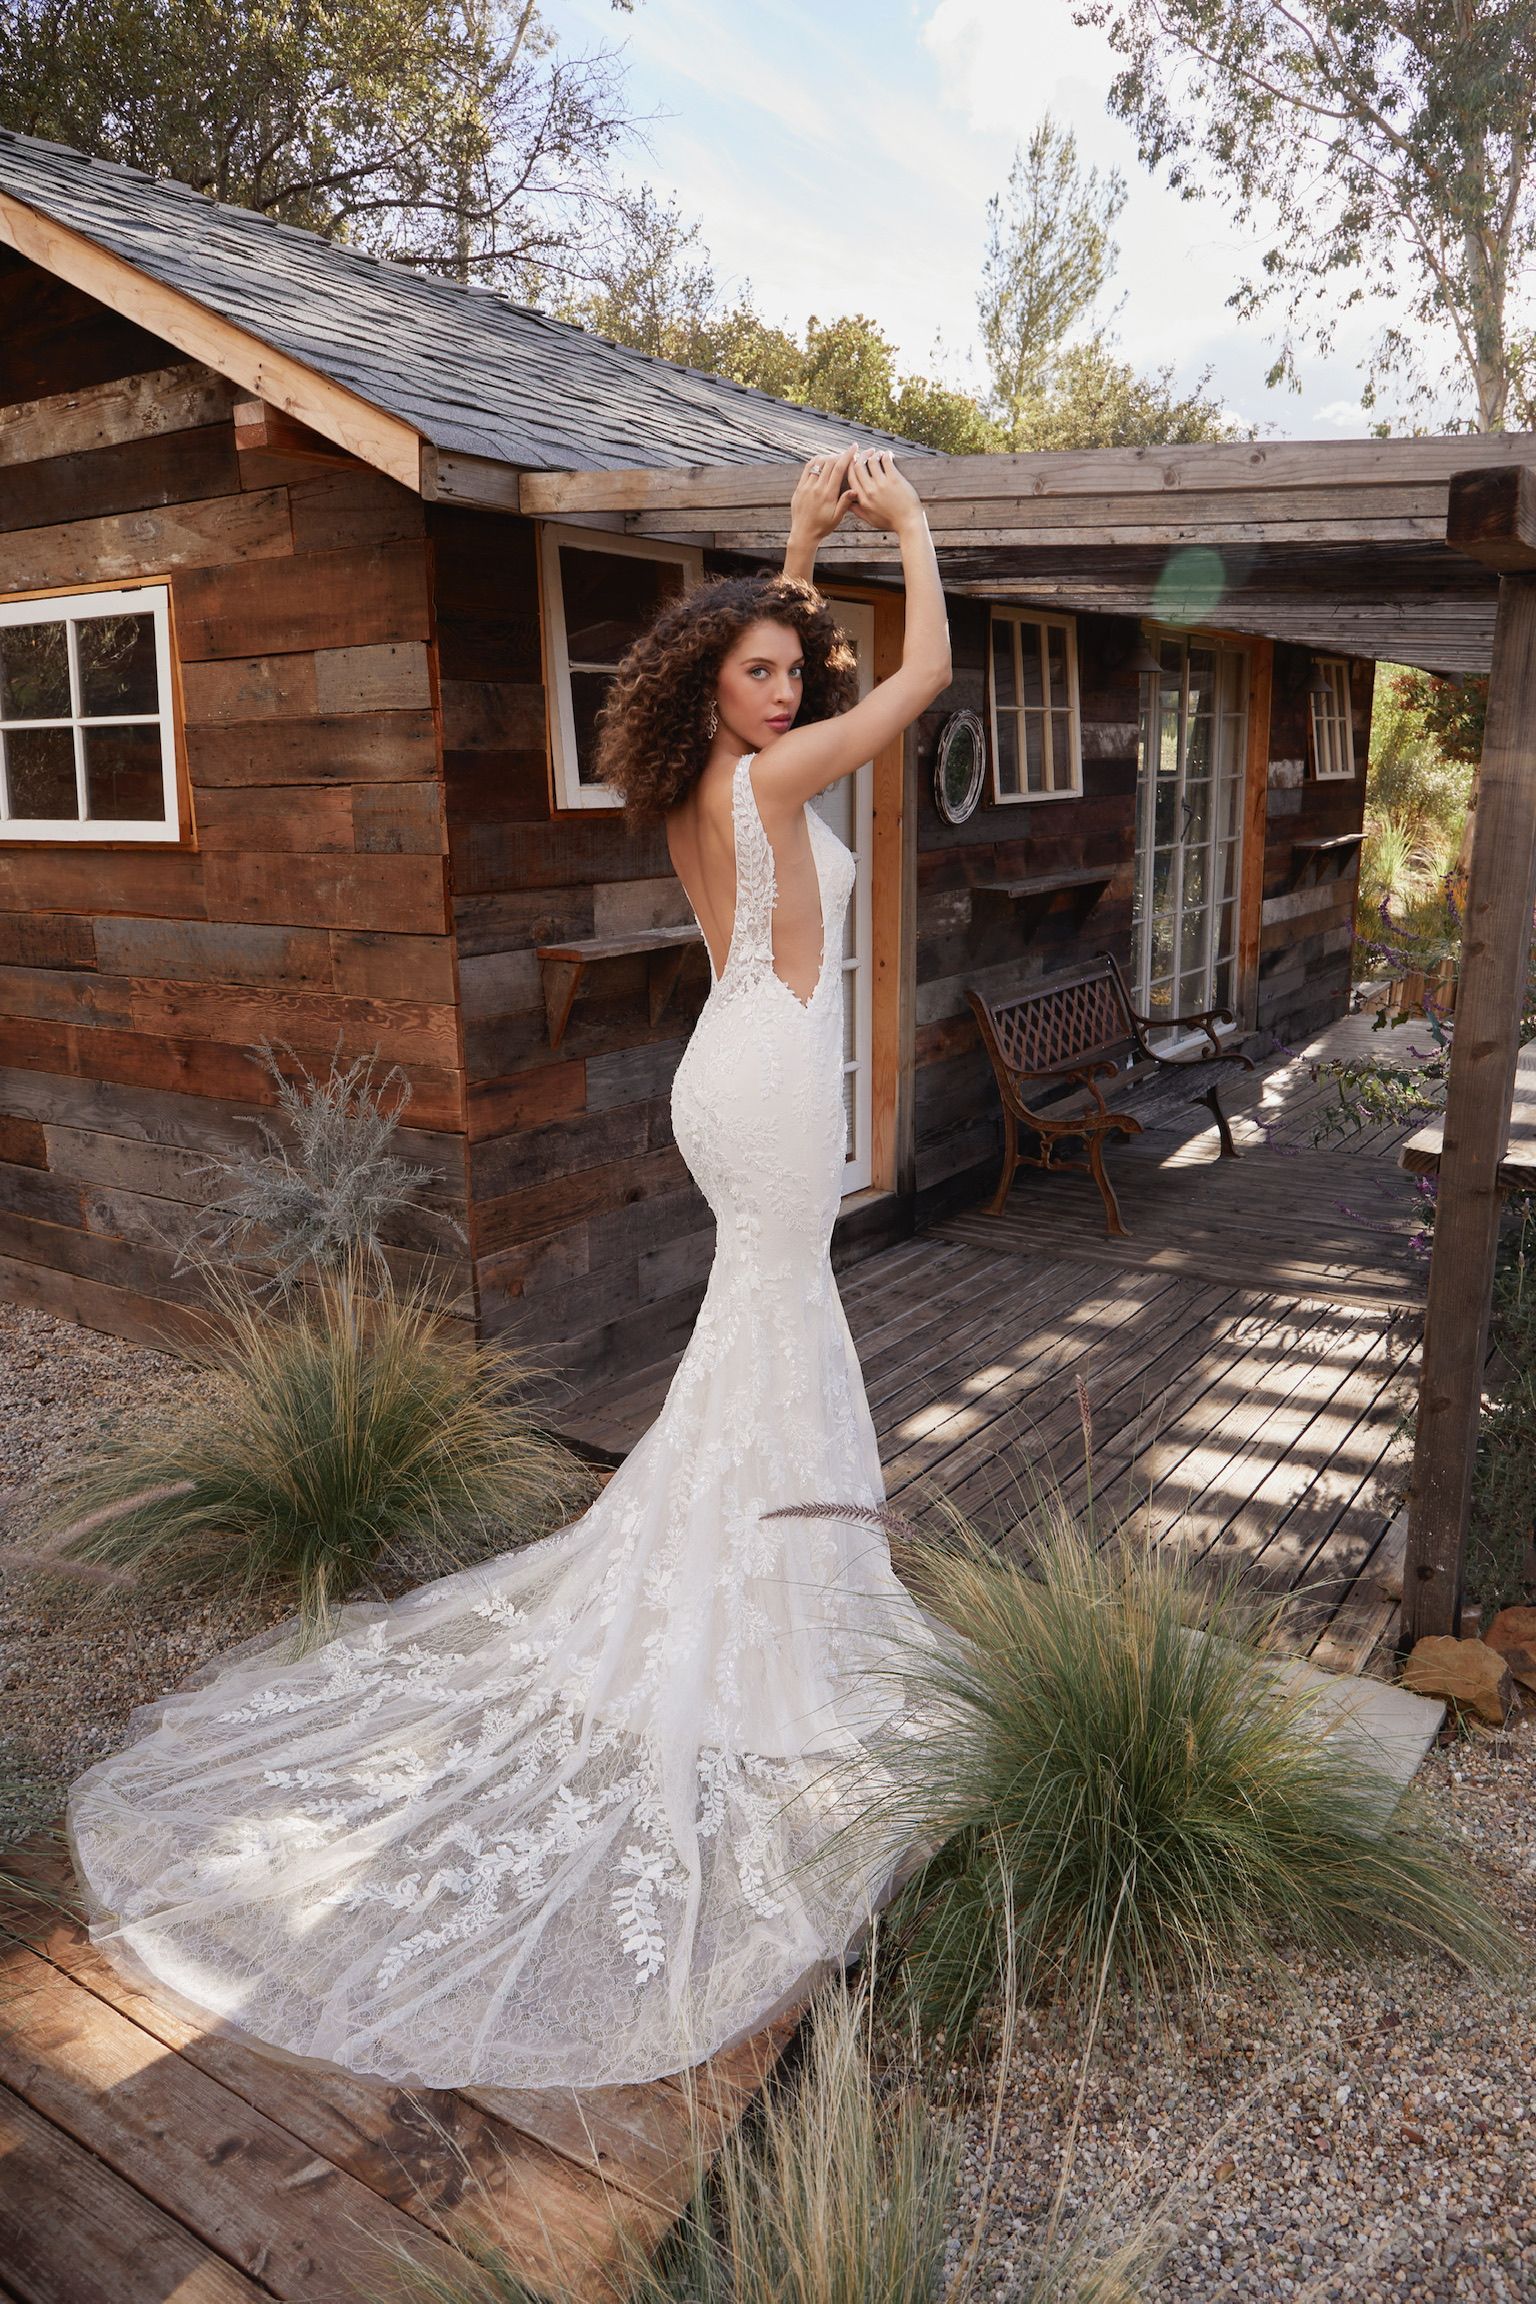 A woman in a wedding dress is standing in front of a wooden cabin.